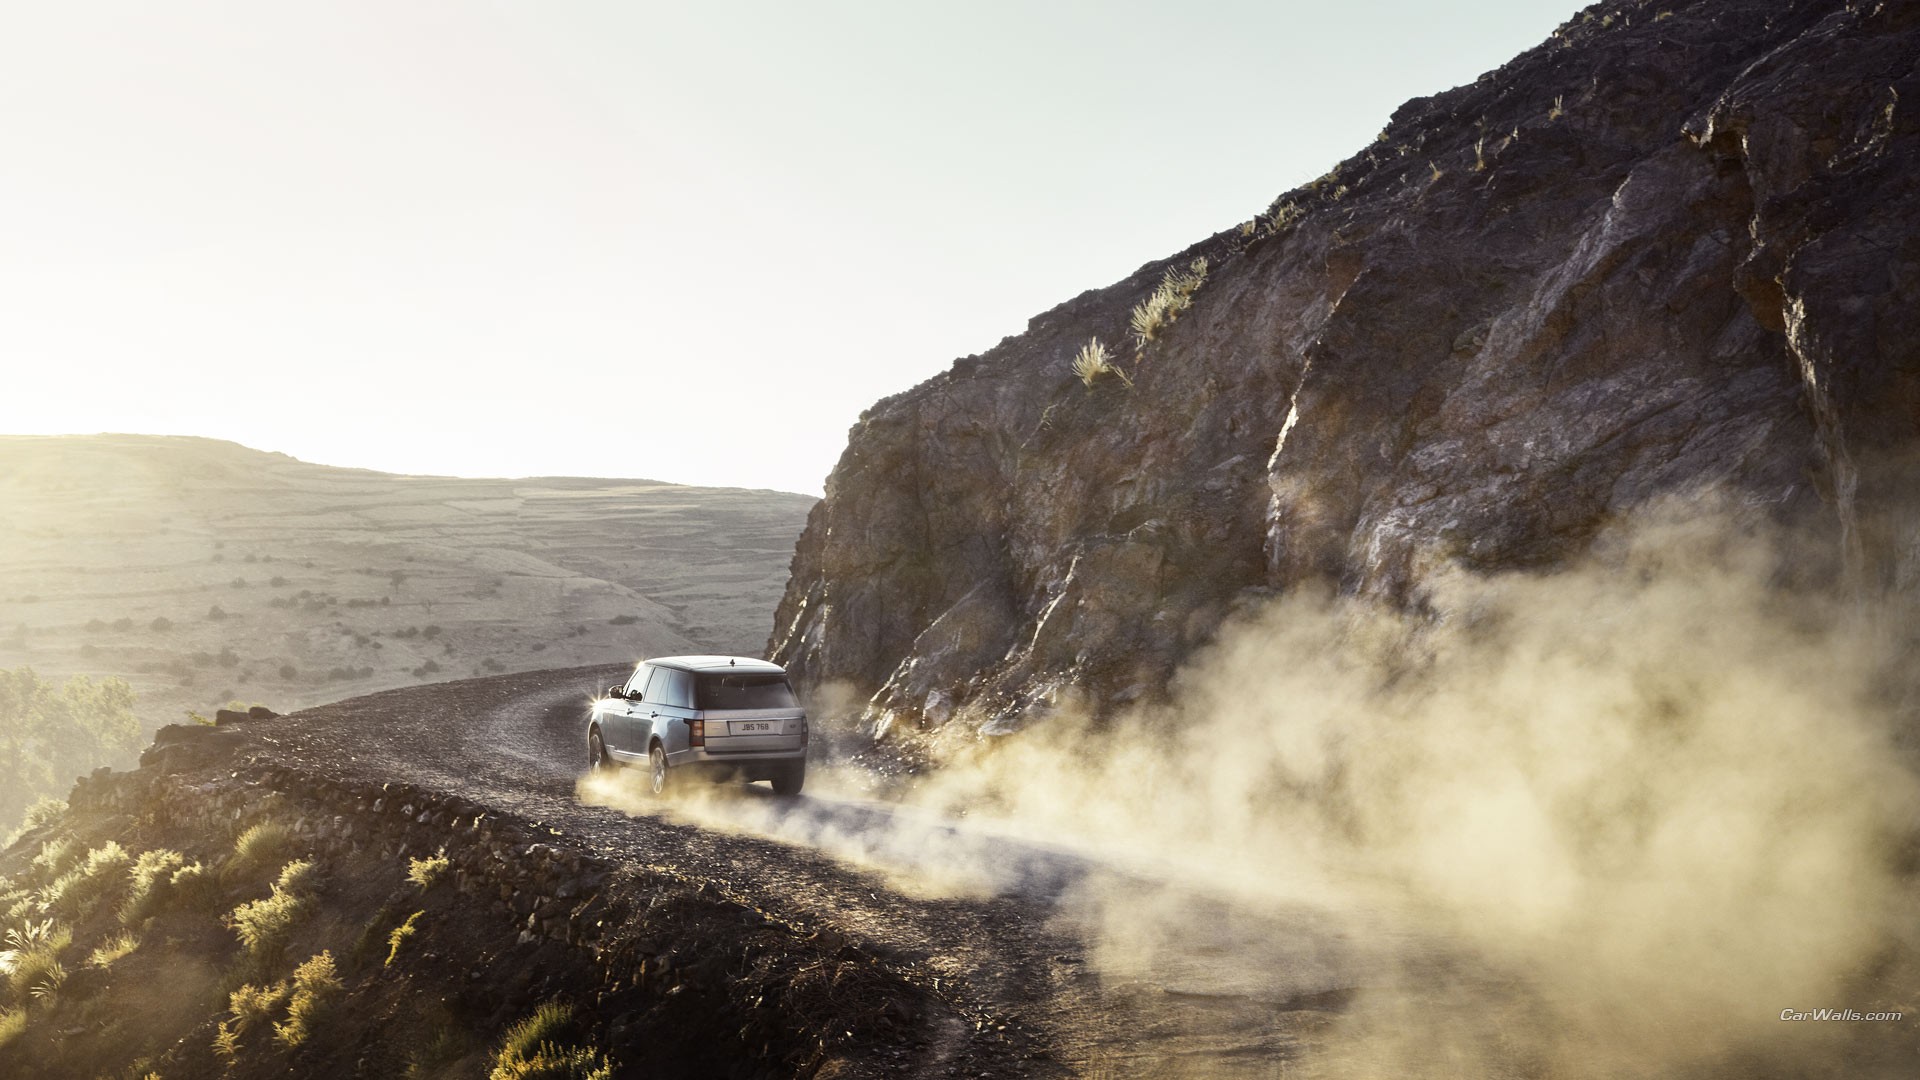 Range Rover rides through the dust in the mountains